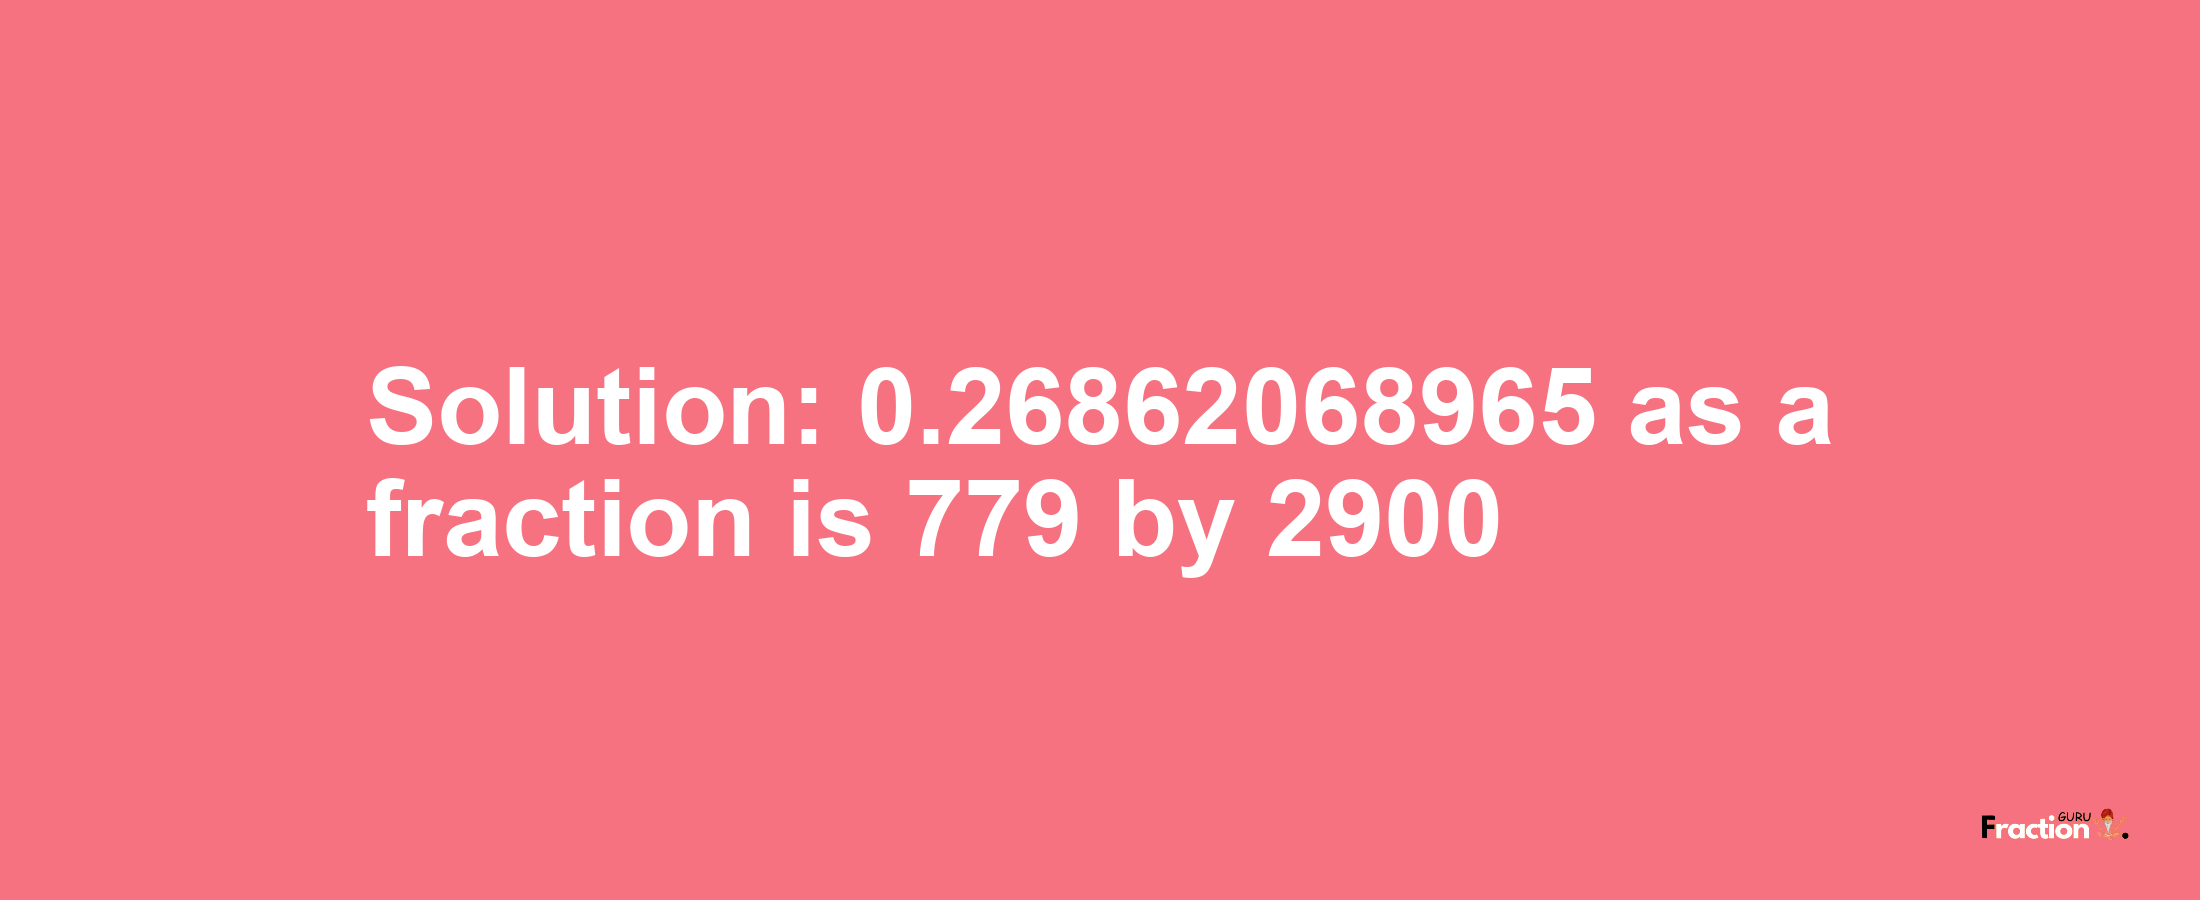 Solution:0.26862068965 as a fraction is 779/2900